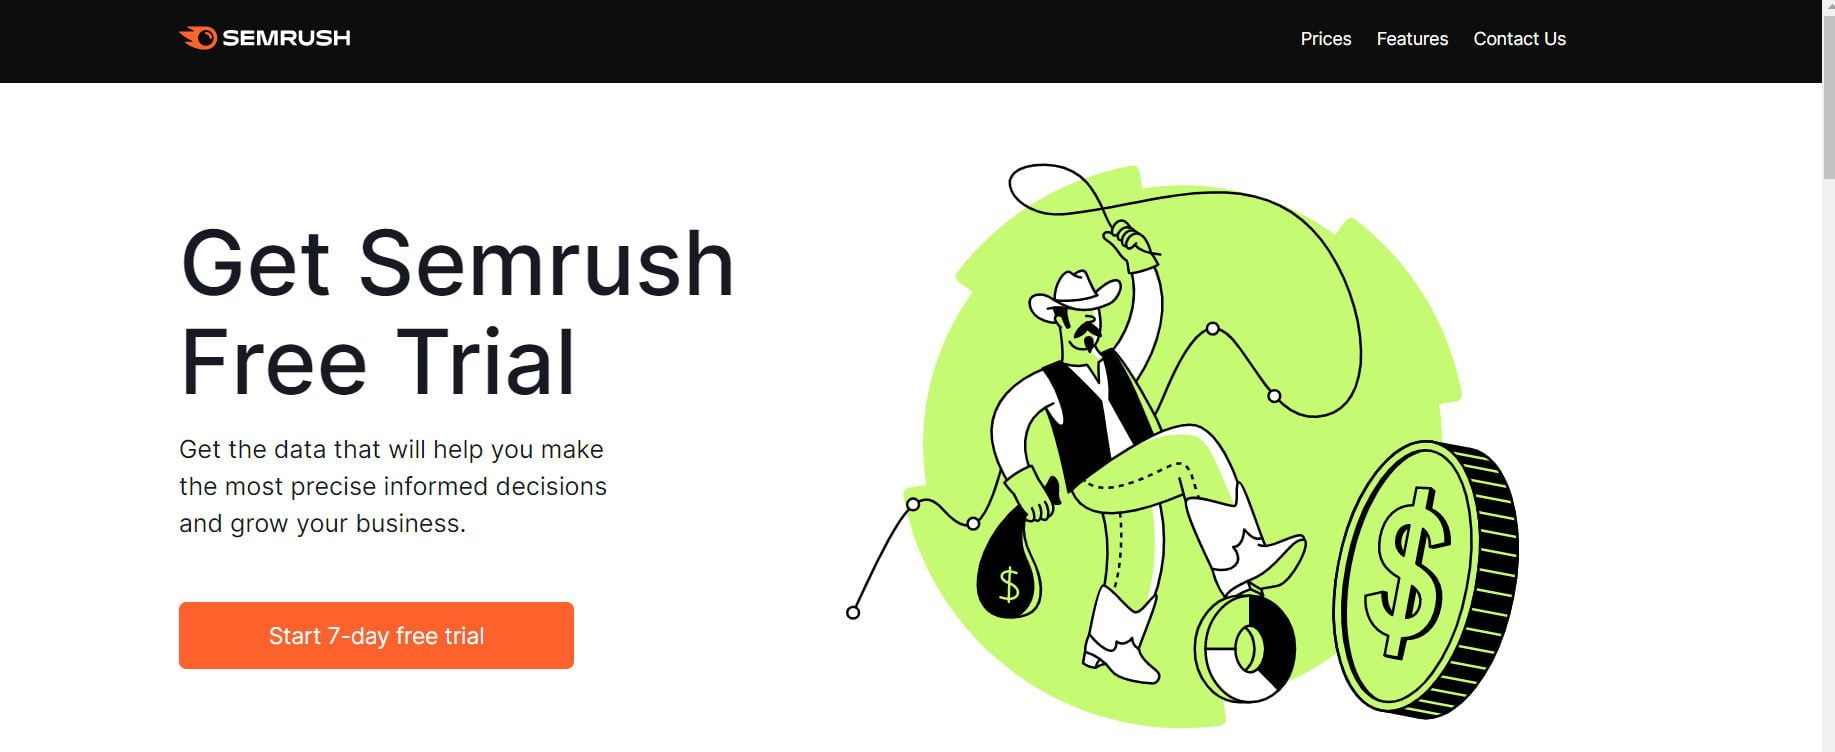 The complete package for SEO and SEM: SEMrush